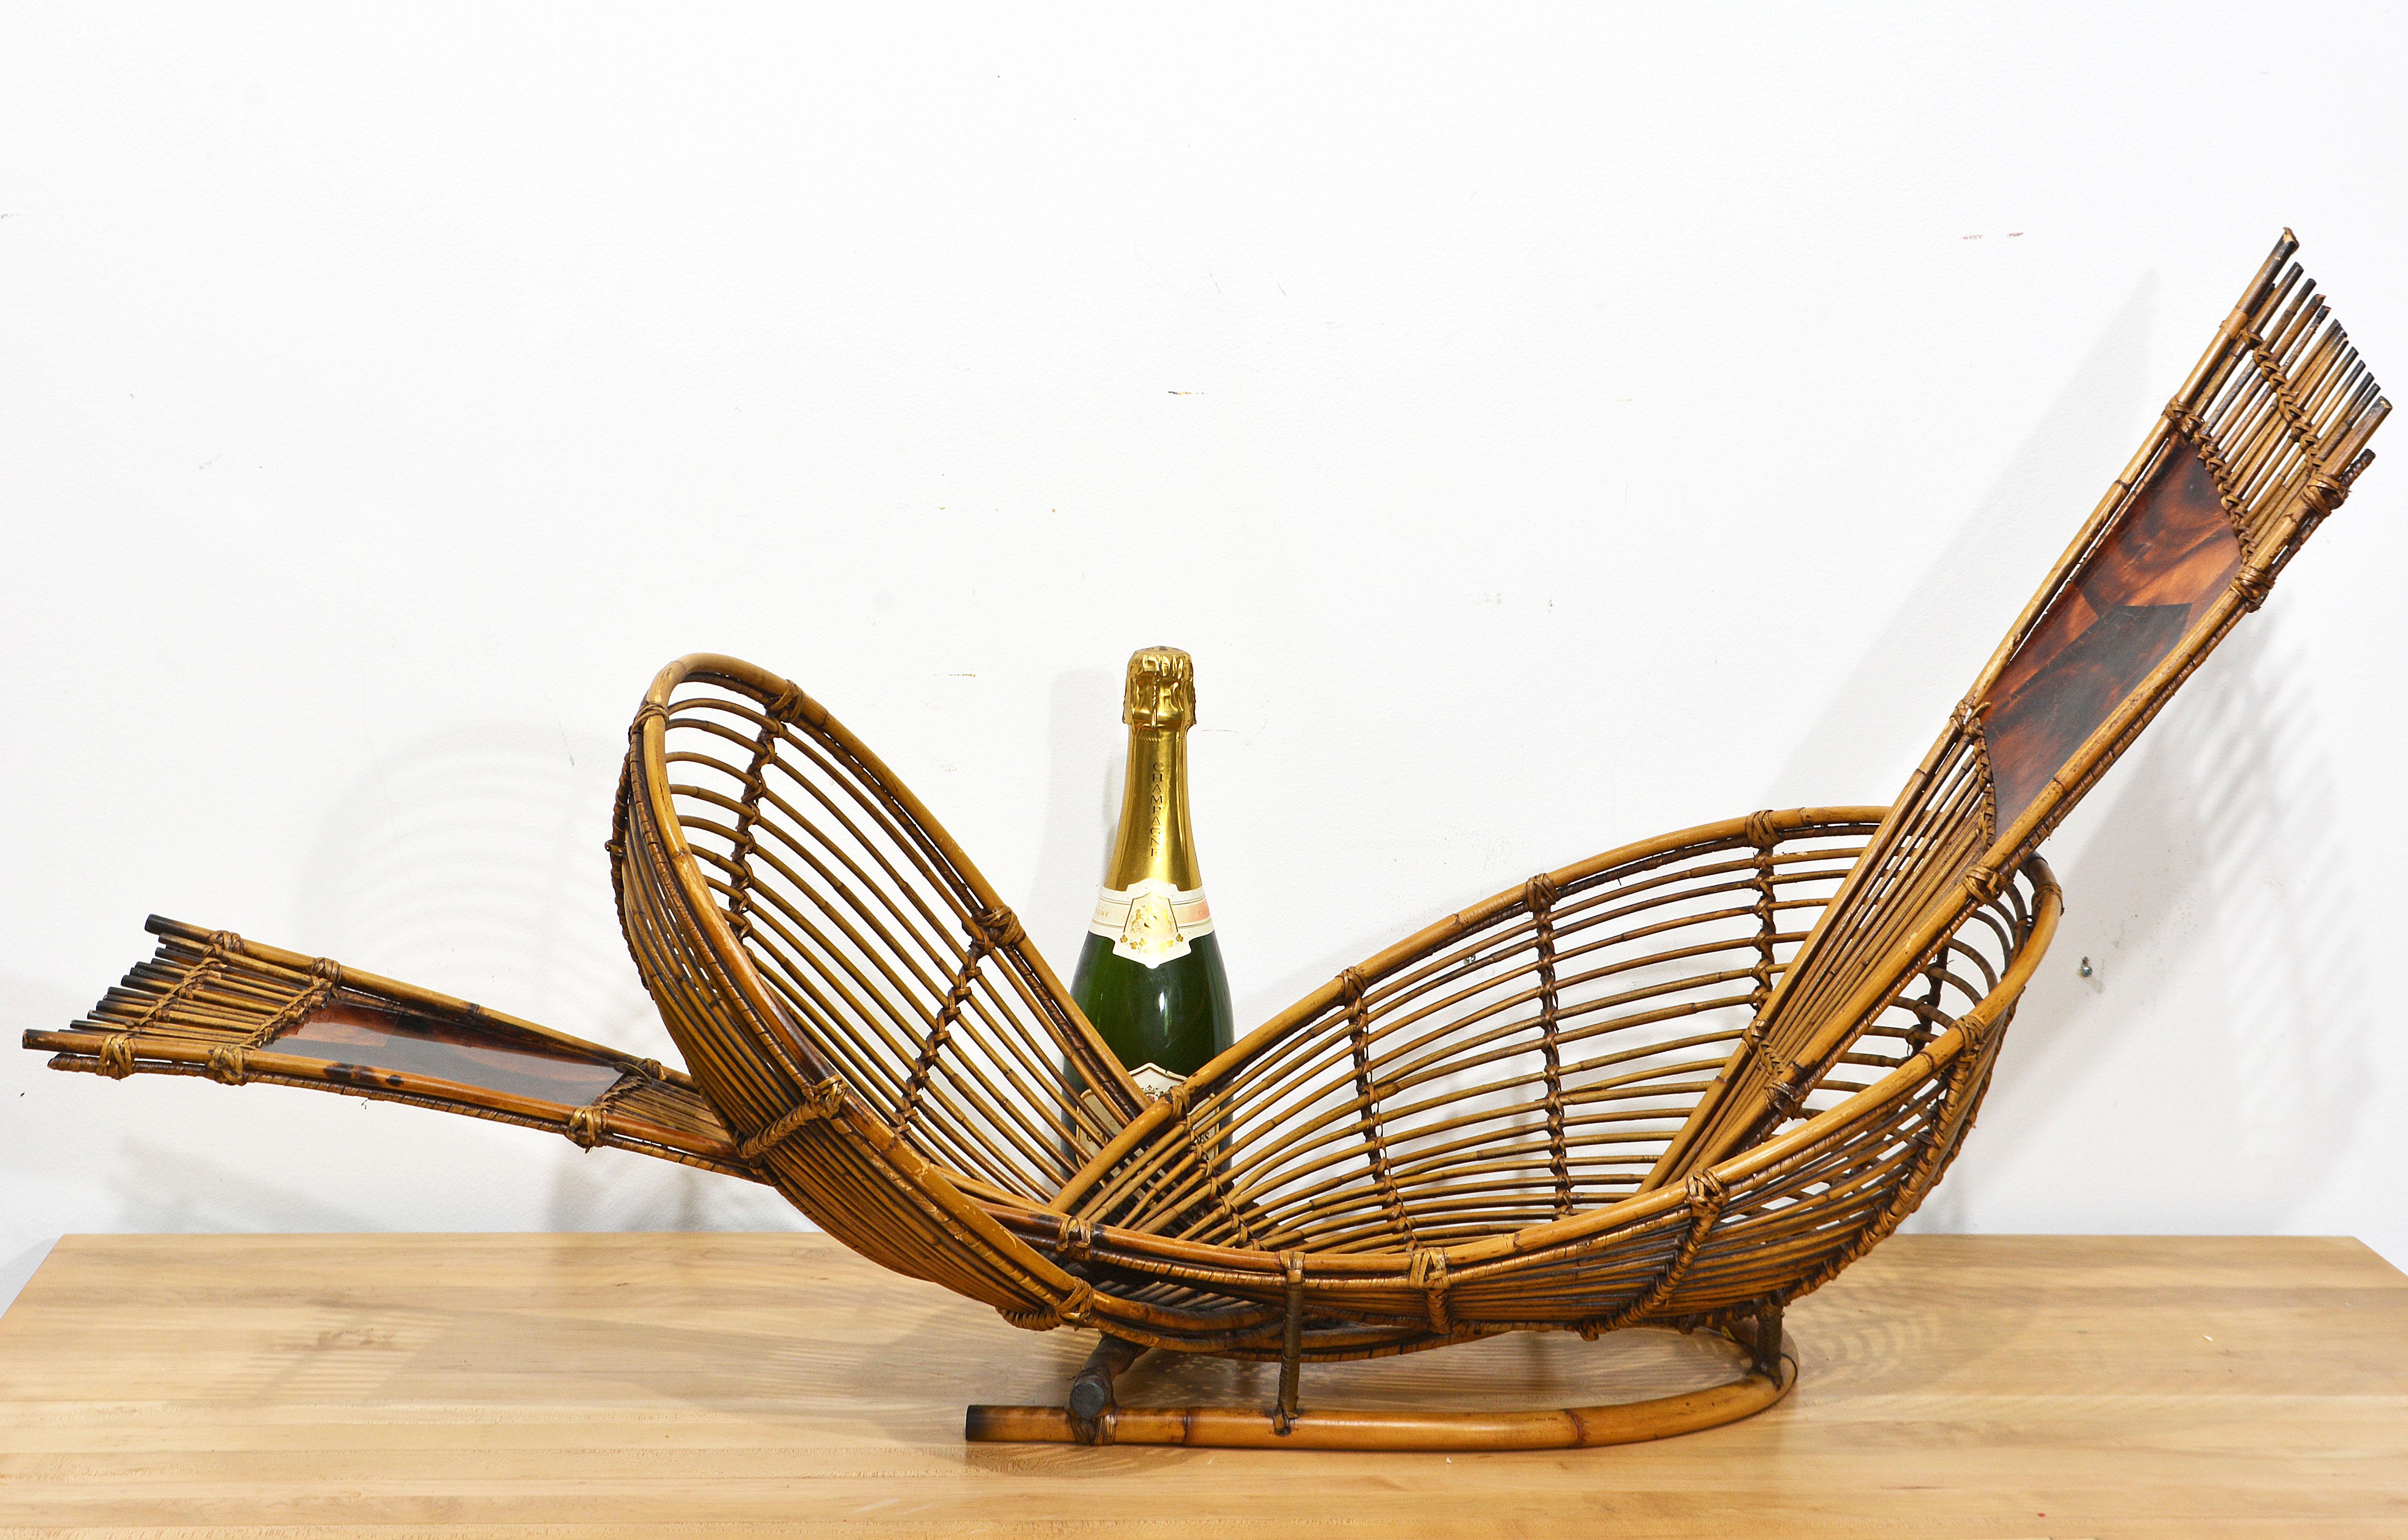 Shaped as a sculpture reminiscent of the ancient infinity symbol this centerpiece or fruitbowl by the high end Palecek of San Francisco is an absolute feast for the eyes. Carefully constructed after old traditions of pencil reed, bent rattan and pen